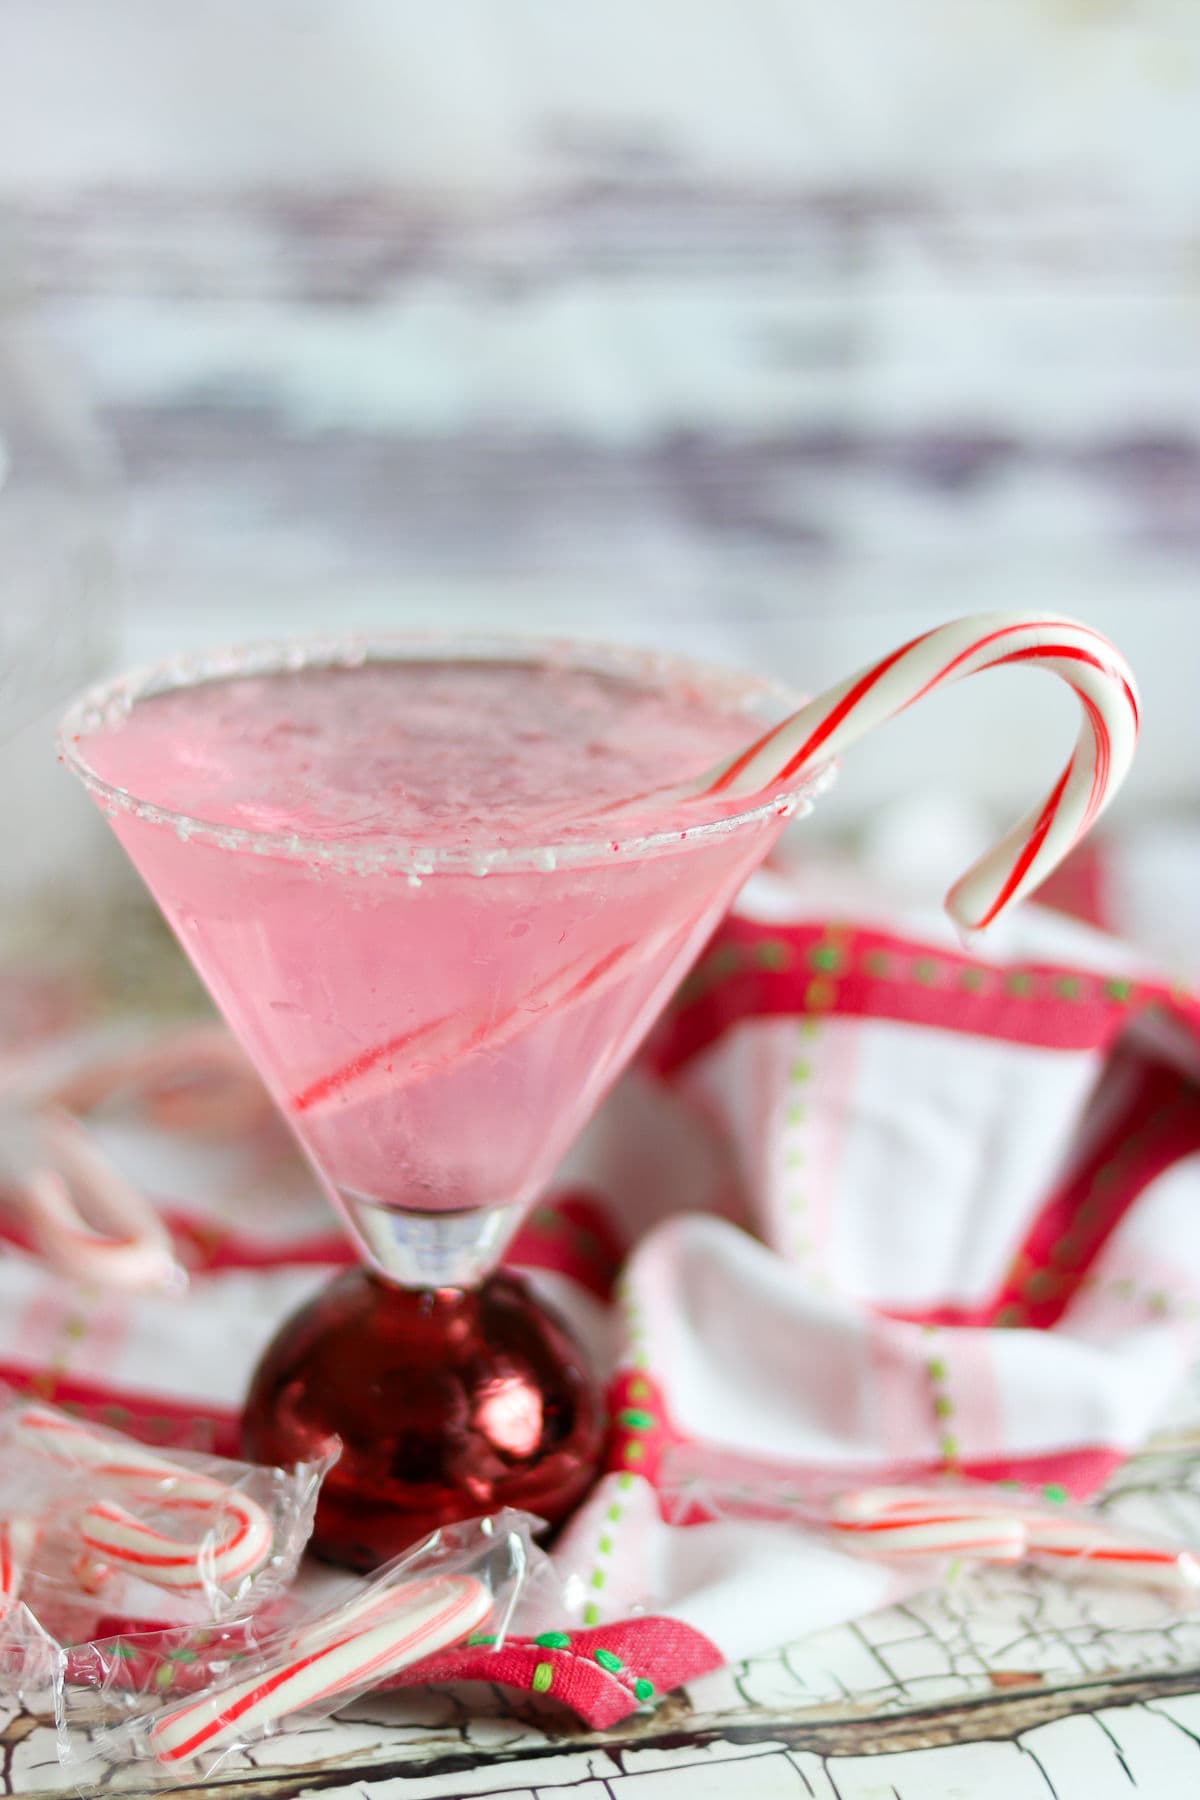 A pink martini in a cocktail glass garnished with a candy cane.